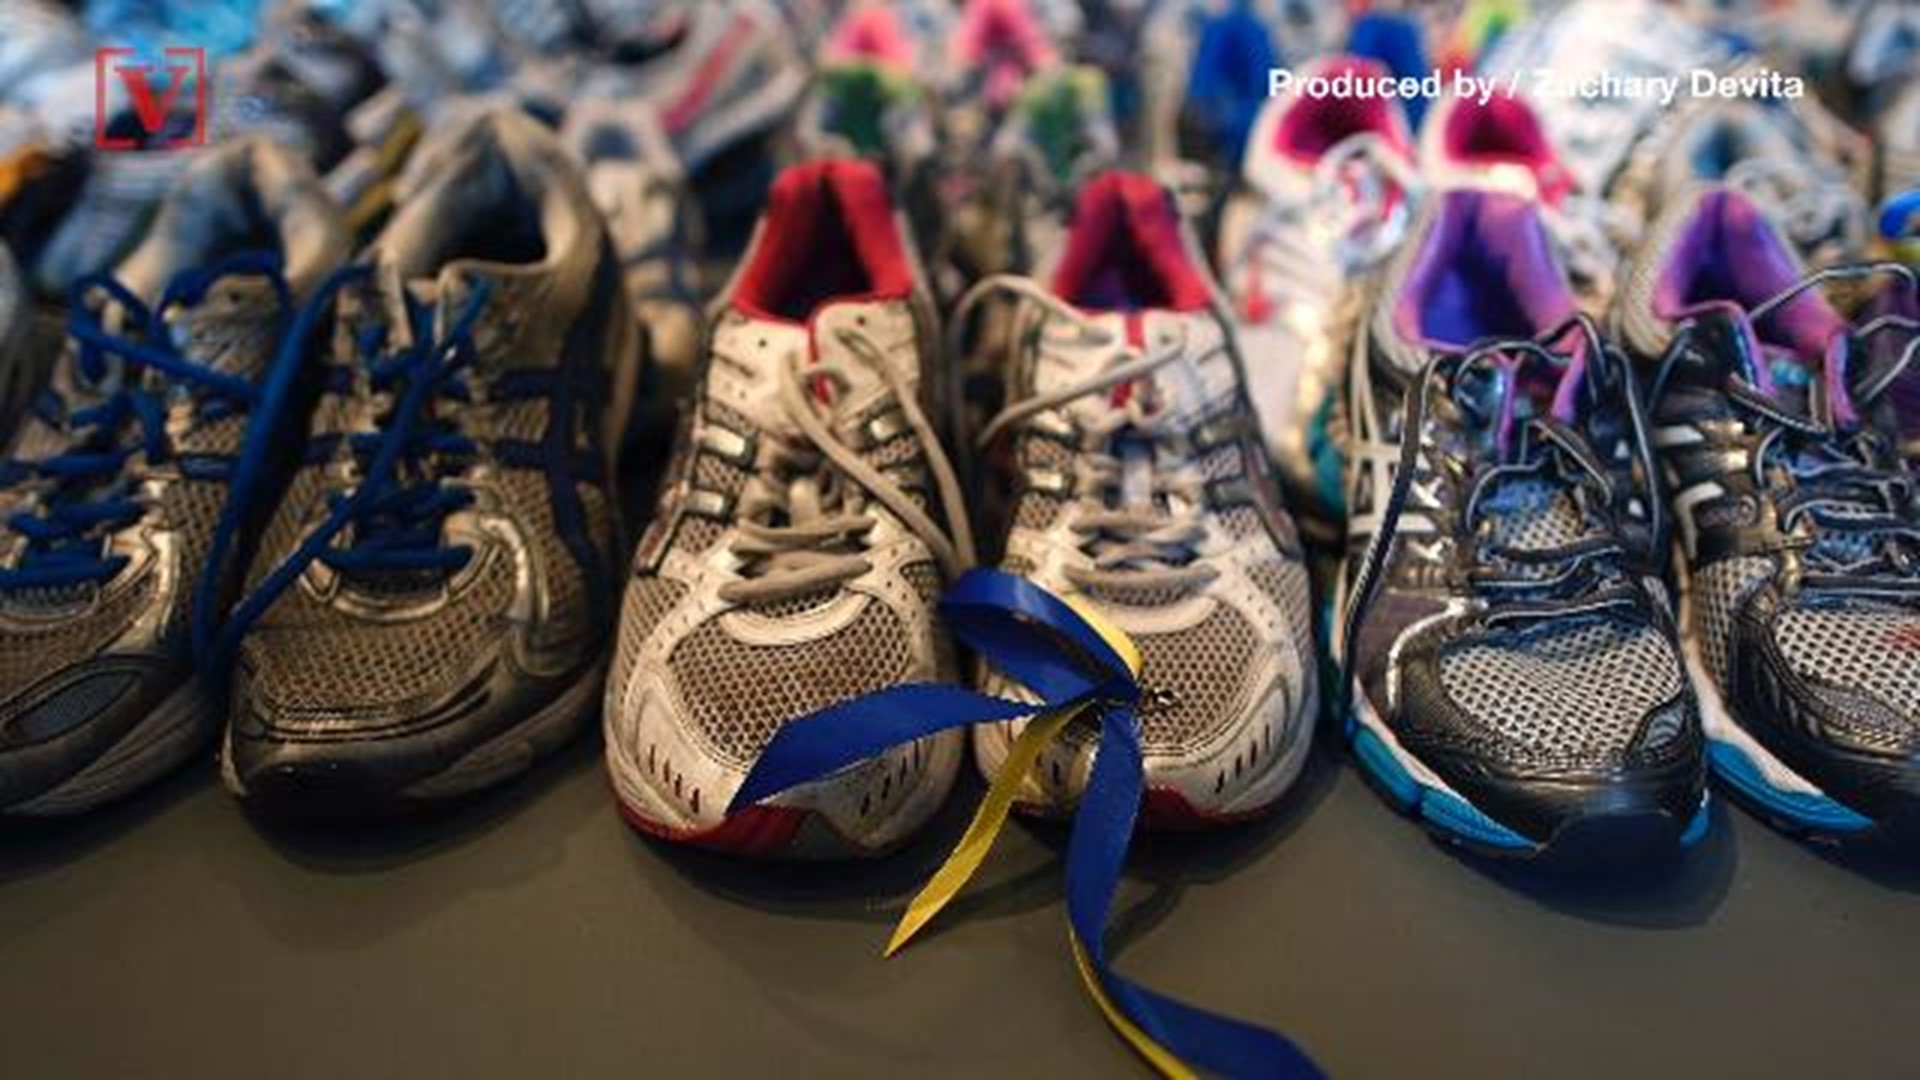 A Museum in Massachusetts plans to display hundreds of running shoes that will be part of an exhibit commemorating the fifth anniversary of the Boston Marathon Bombing. For more on the story here is Zachary Devita.